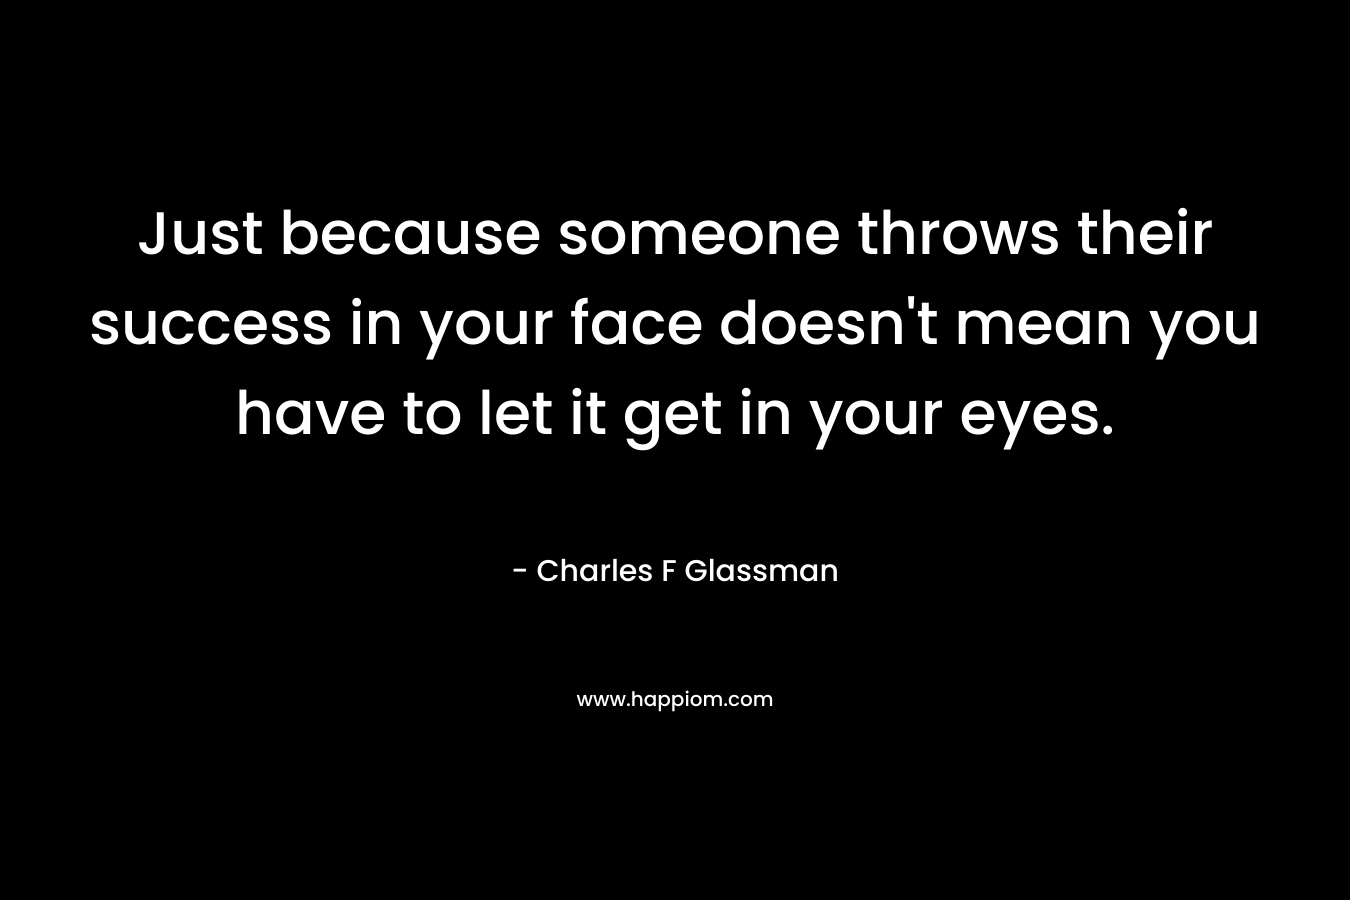 Just because someone throws their success in your face doesn't mean you have to let it get in your eyes.